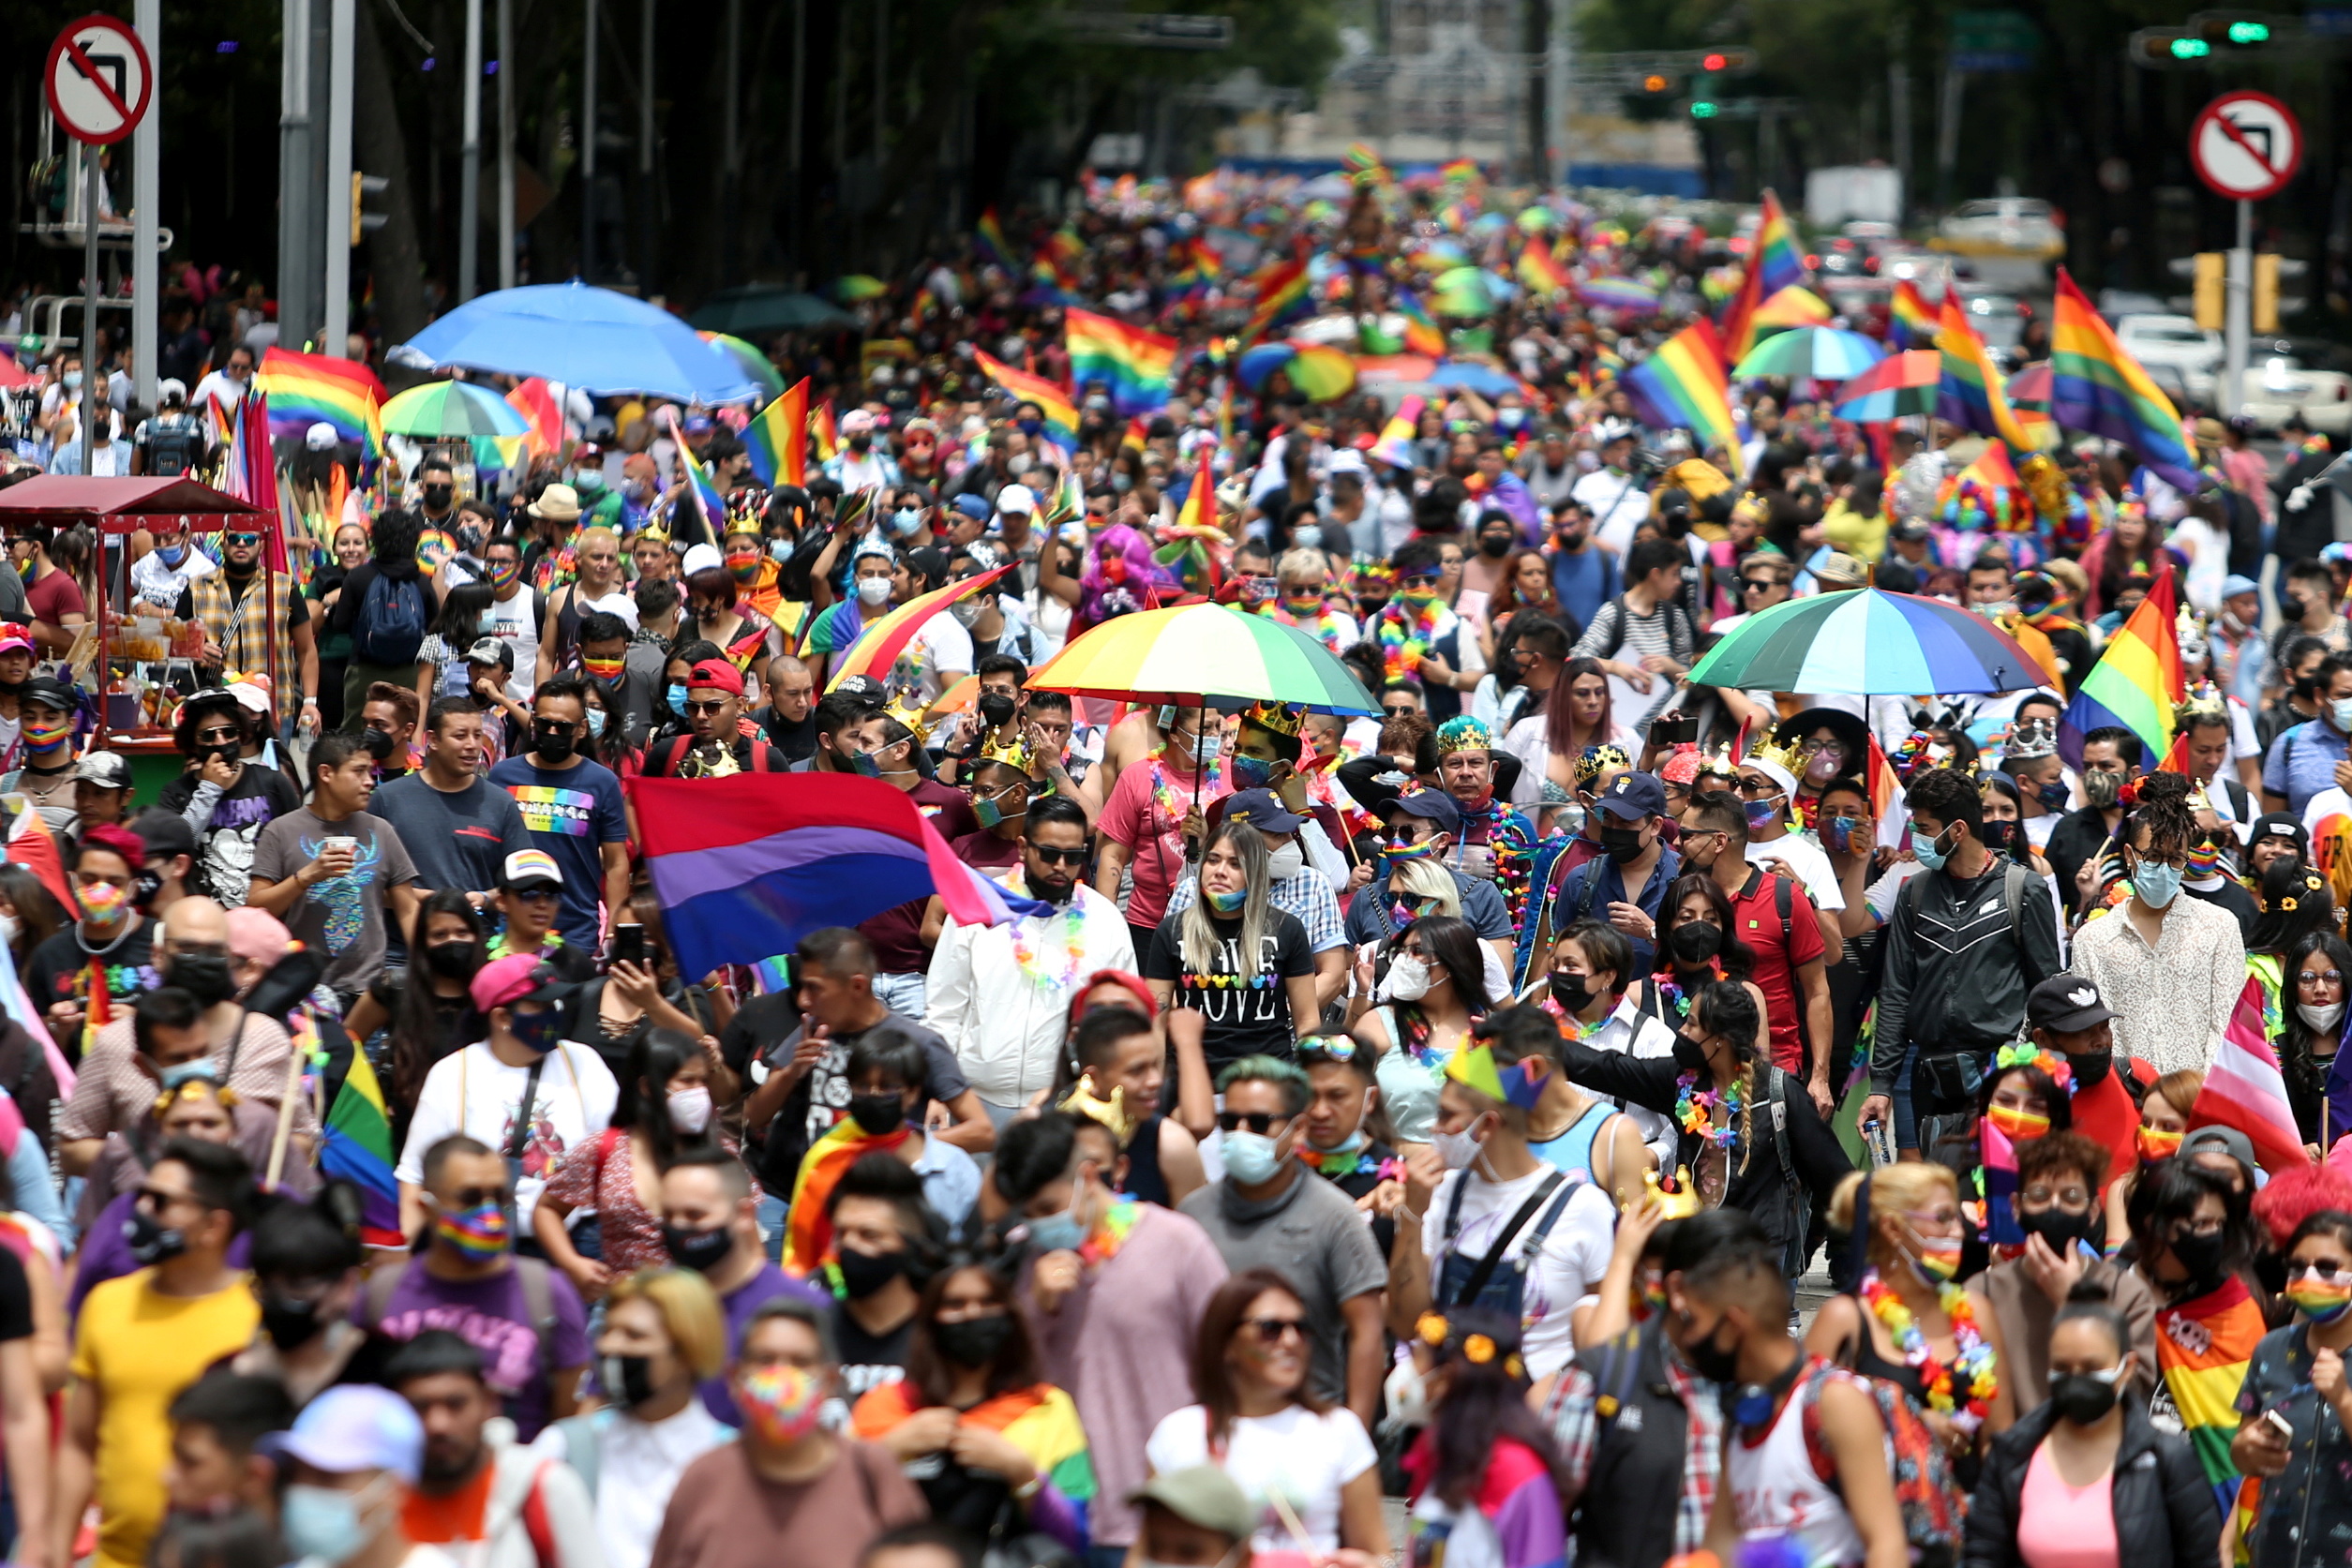 Mexico's LGBT community march as they mark Pride month in Mexico City, Mexico, June 26, 2021. REUTERS/Edgard Garrido